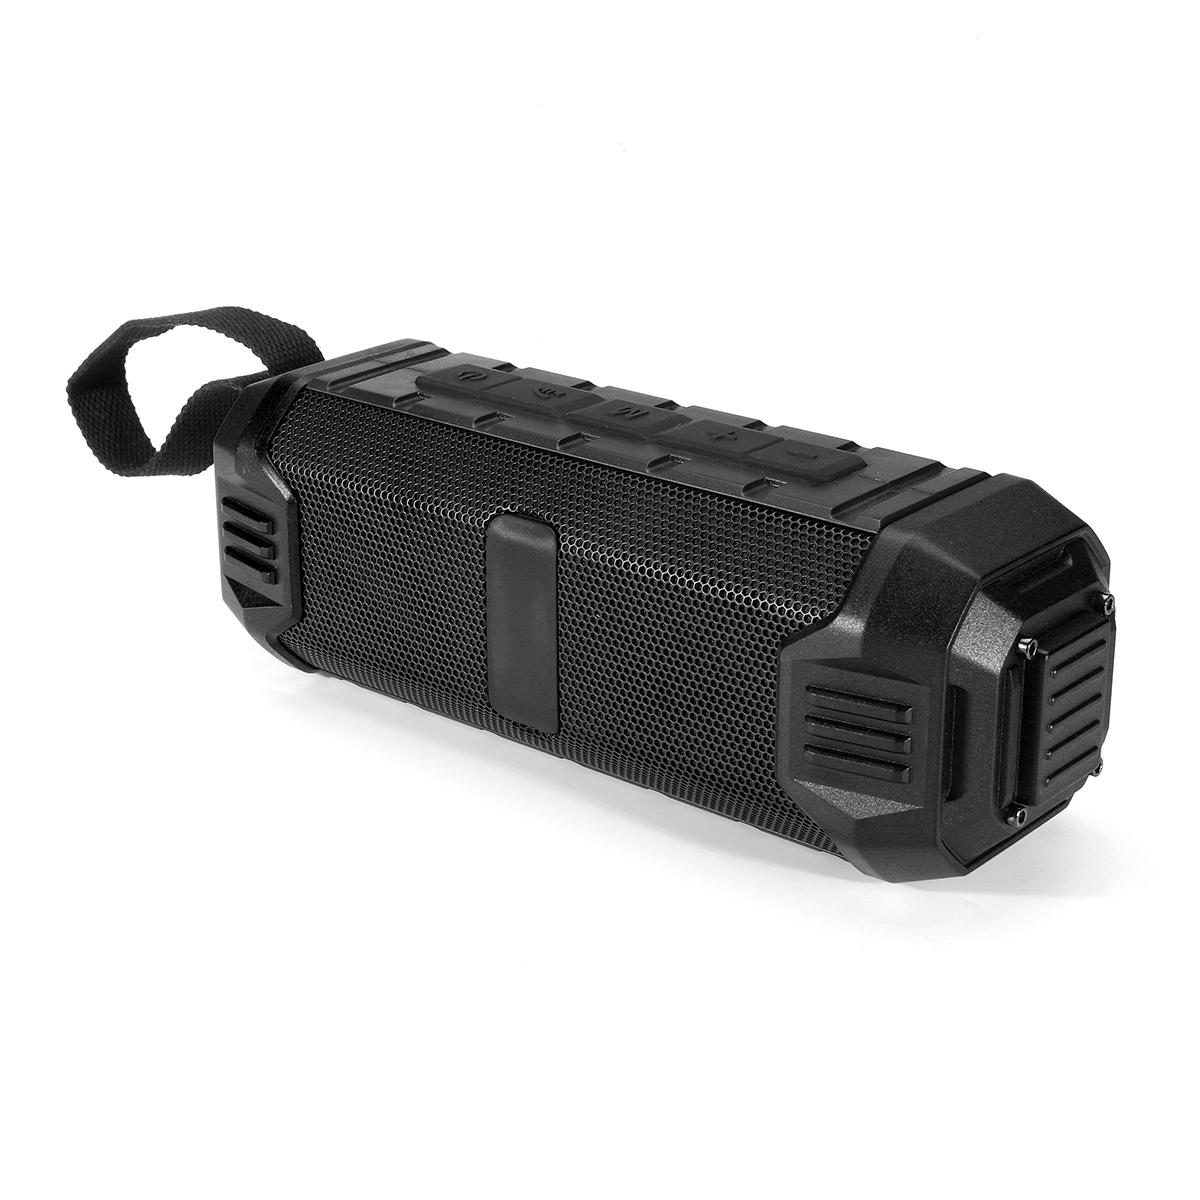 16W Portable Wireless bluetooth Speaker Stereo TF Card Aux-in IPX5 Waterproof Outdoors Subwoofer BLACK COLOR